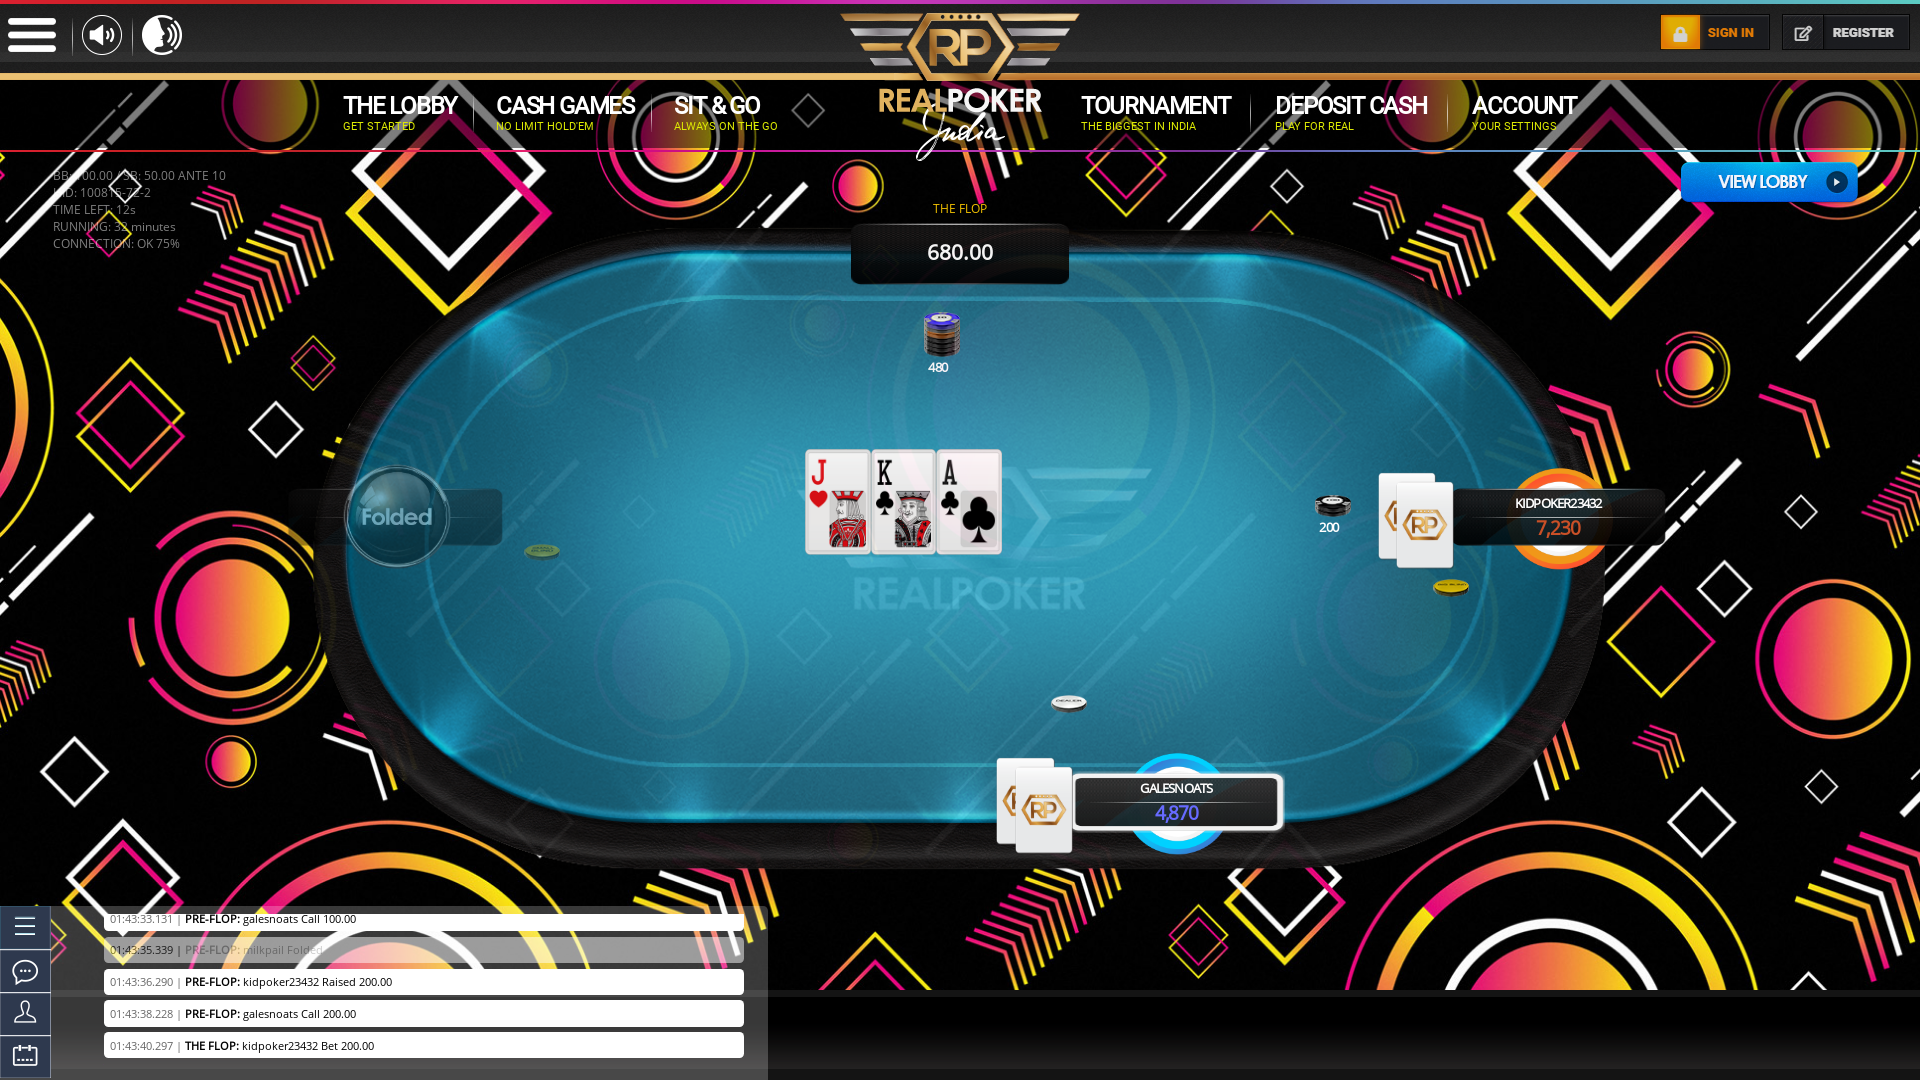 71st dealt hand of the game with kidpoker23432